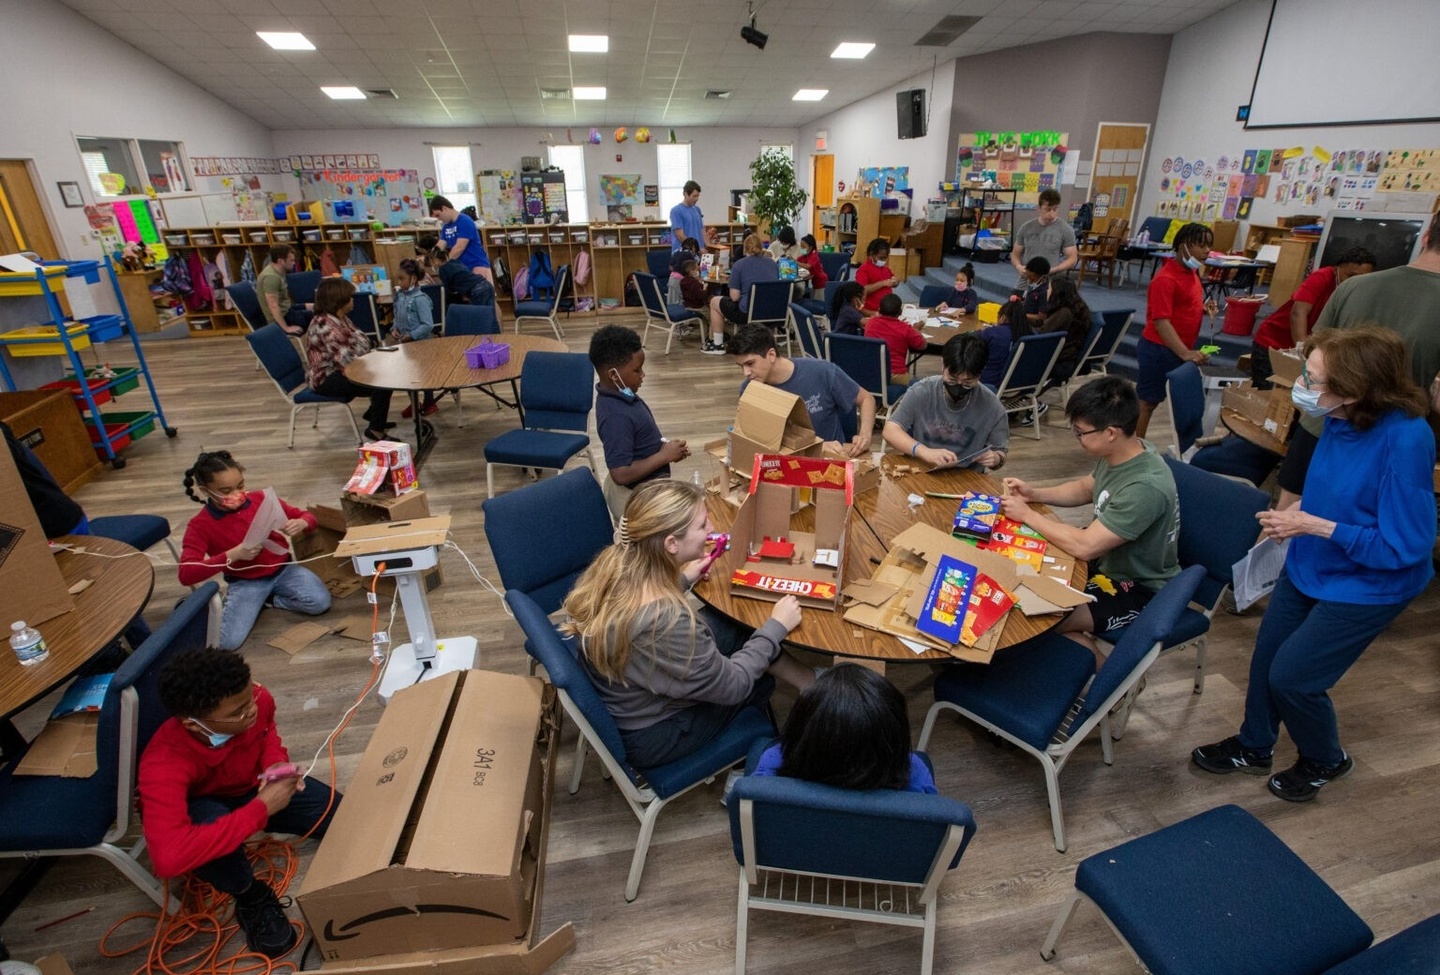 The course “ARCH 490: Explore and Contribute” brings WashU students to Blossom Wood Day School in St. Louis for hands-on activities. (Photo: Joe Angeles/Washington University)